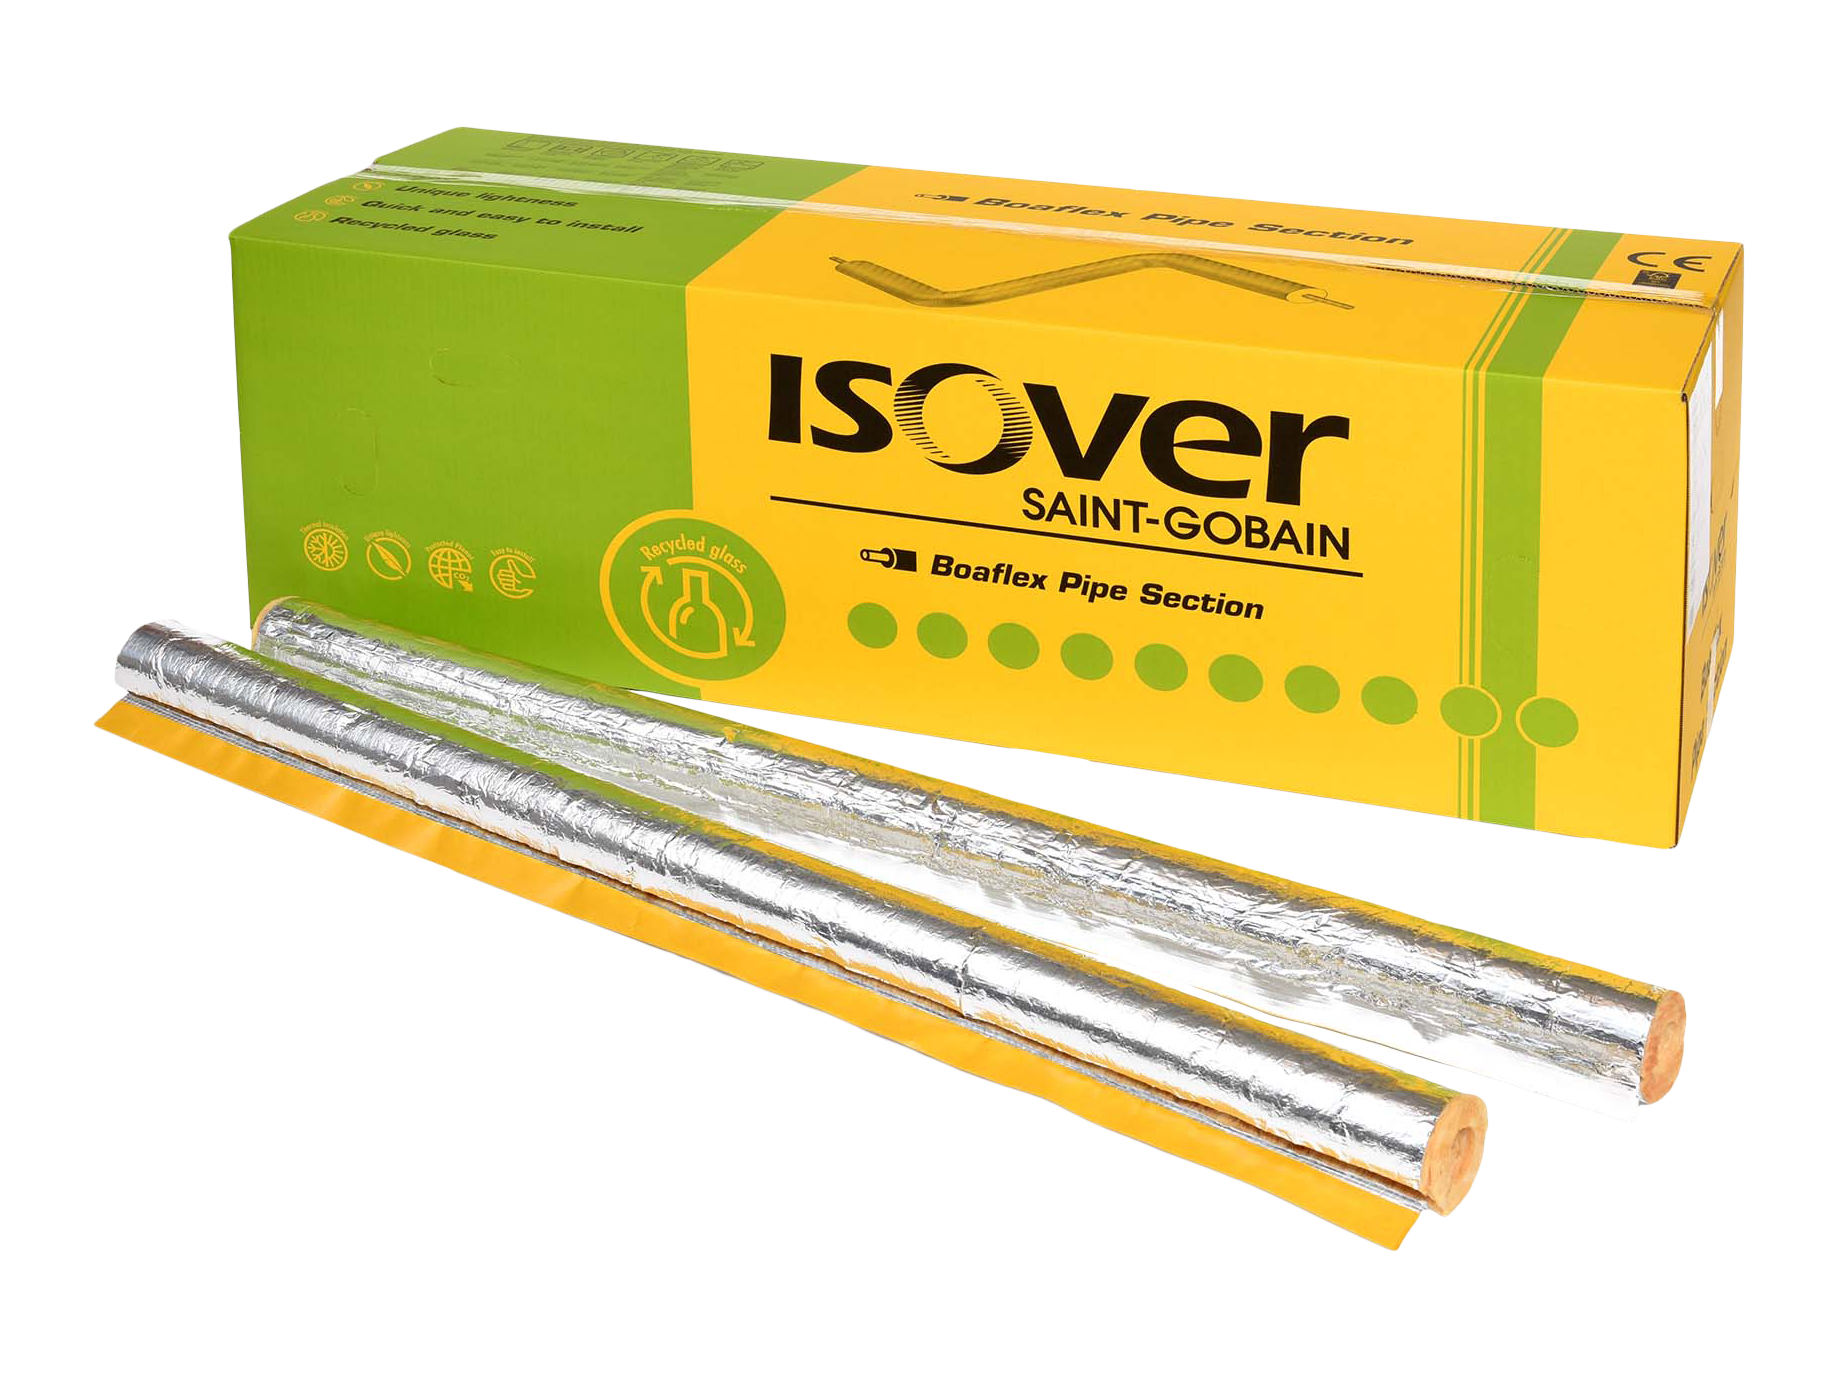 ISOVER Boaflex Pipe Section 42/50